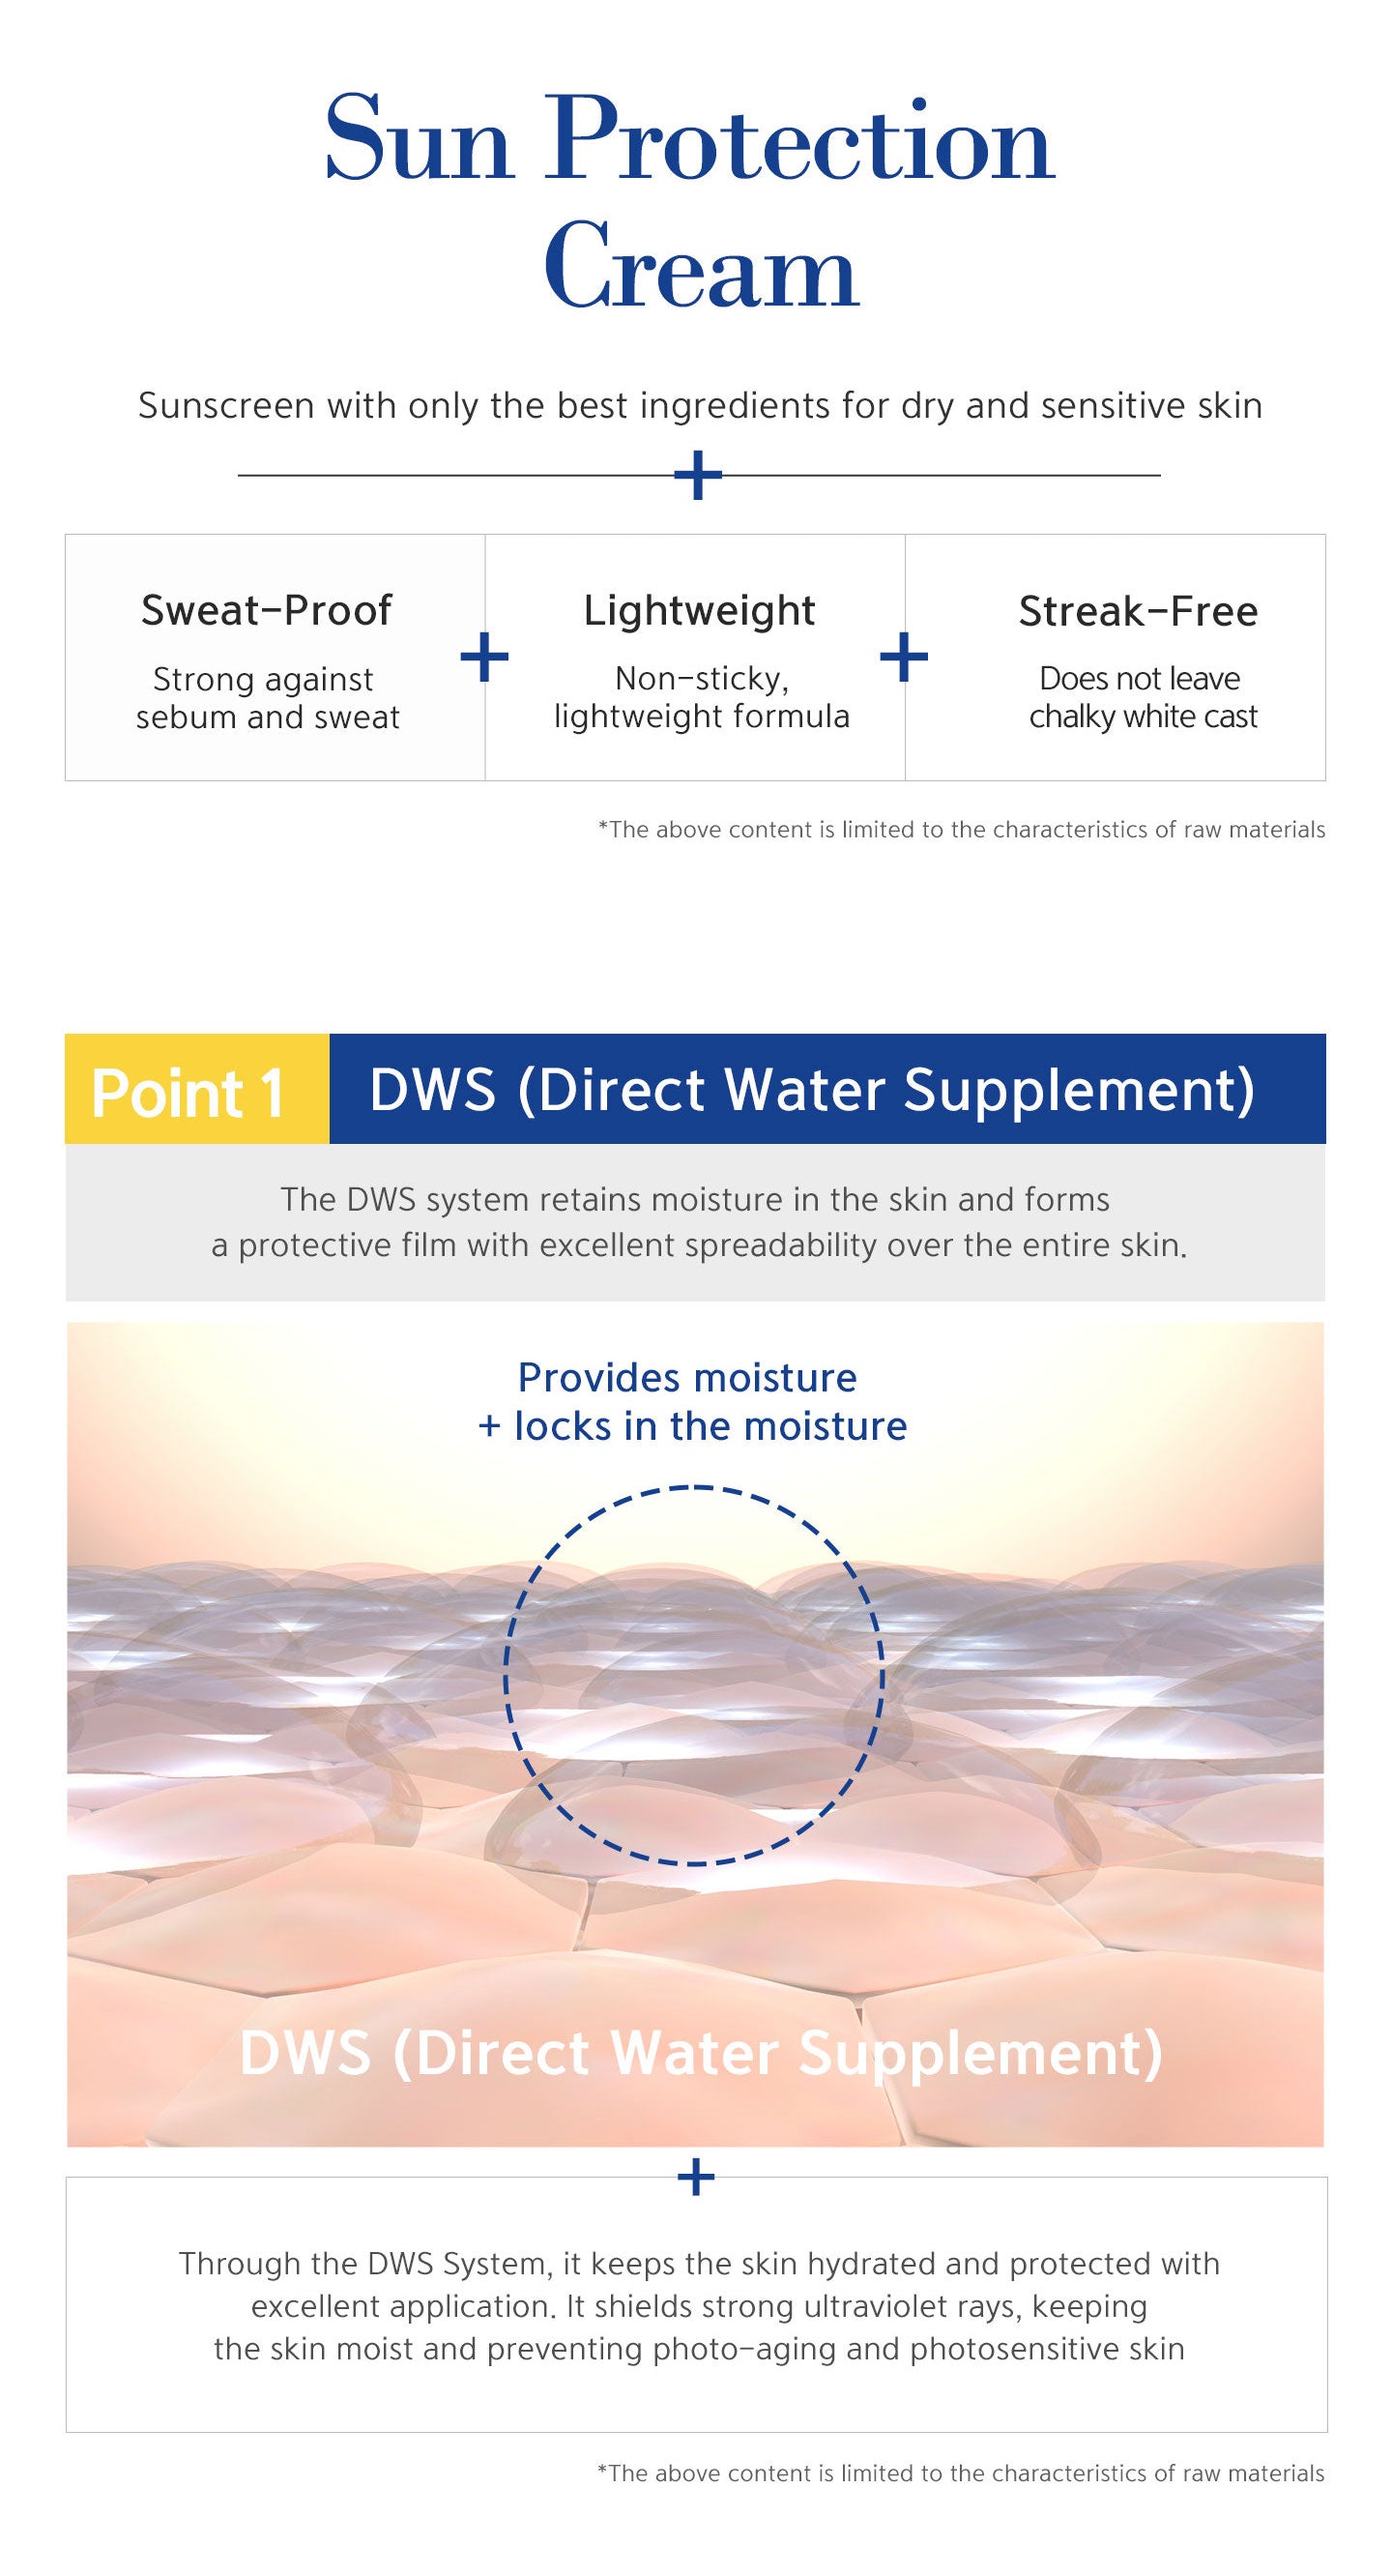 Sun protection cream is sweat-proof, lightweight, and streak-free. DWS system retains moisture in the skin and forms a protective film with excellent spreadability over the entire skin. Provides moisture + locks in the moisture. It shields strong uv rays.